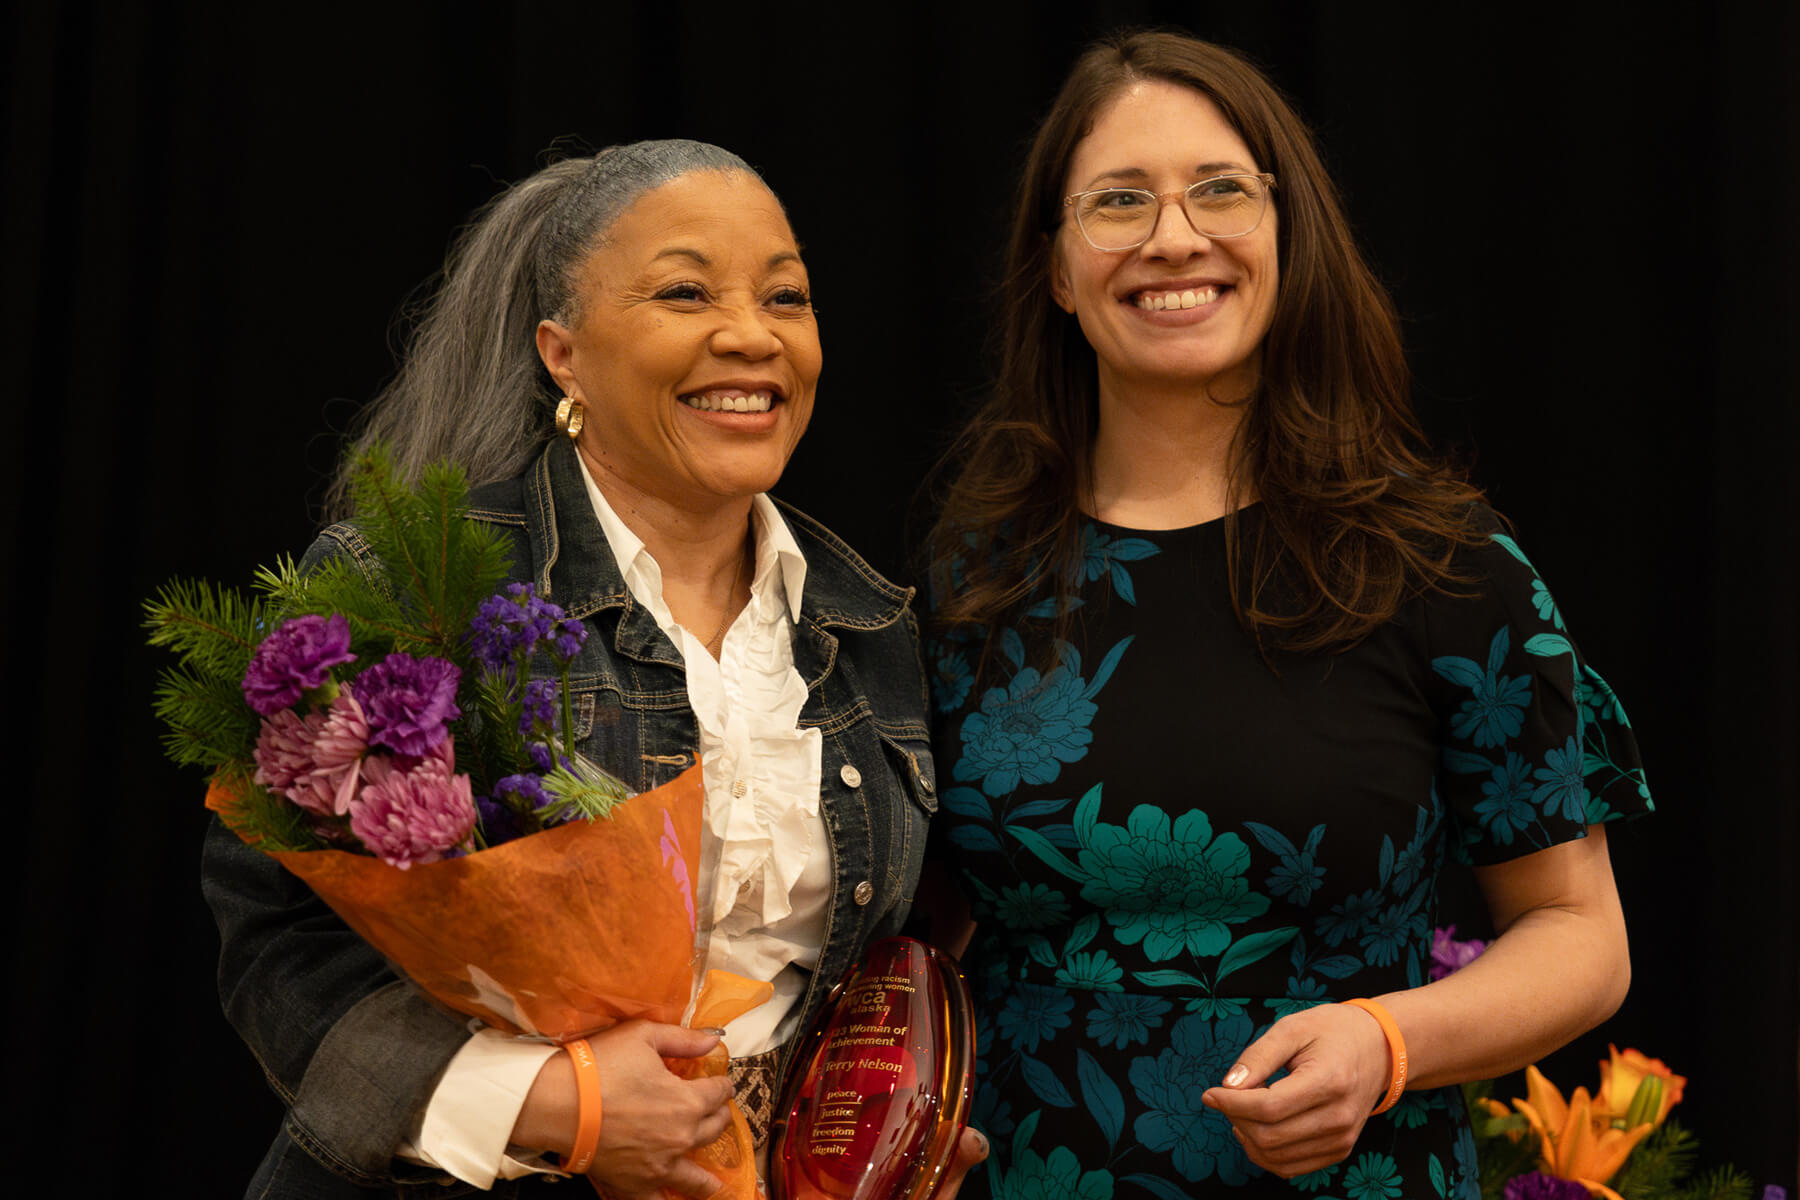 Dr. Terry Nelson, left, receives the 2023 YWCA Woman of Achievement Award. Photo courtesy of Chynna Lockett/University of Alaska Anchorage.